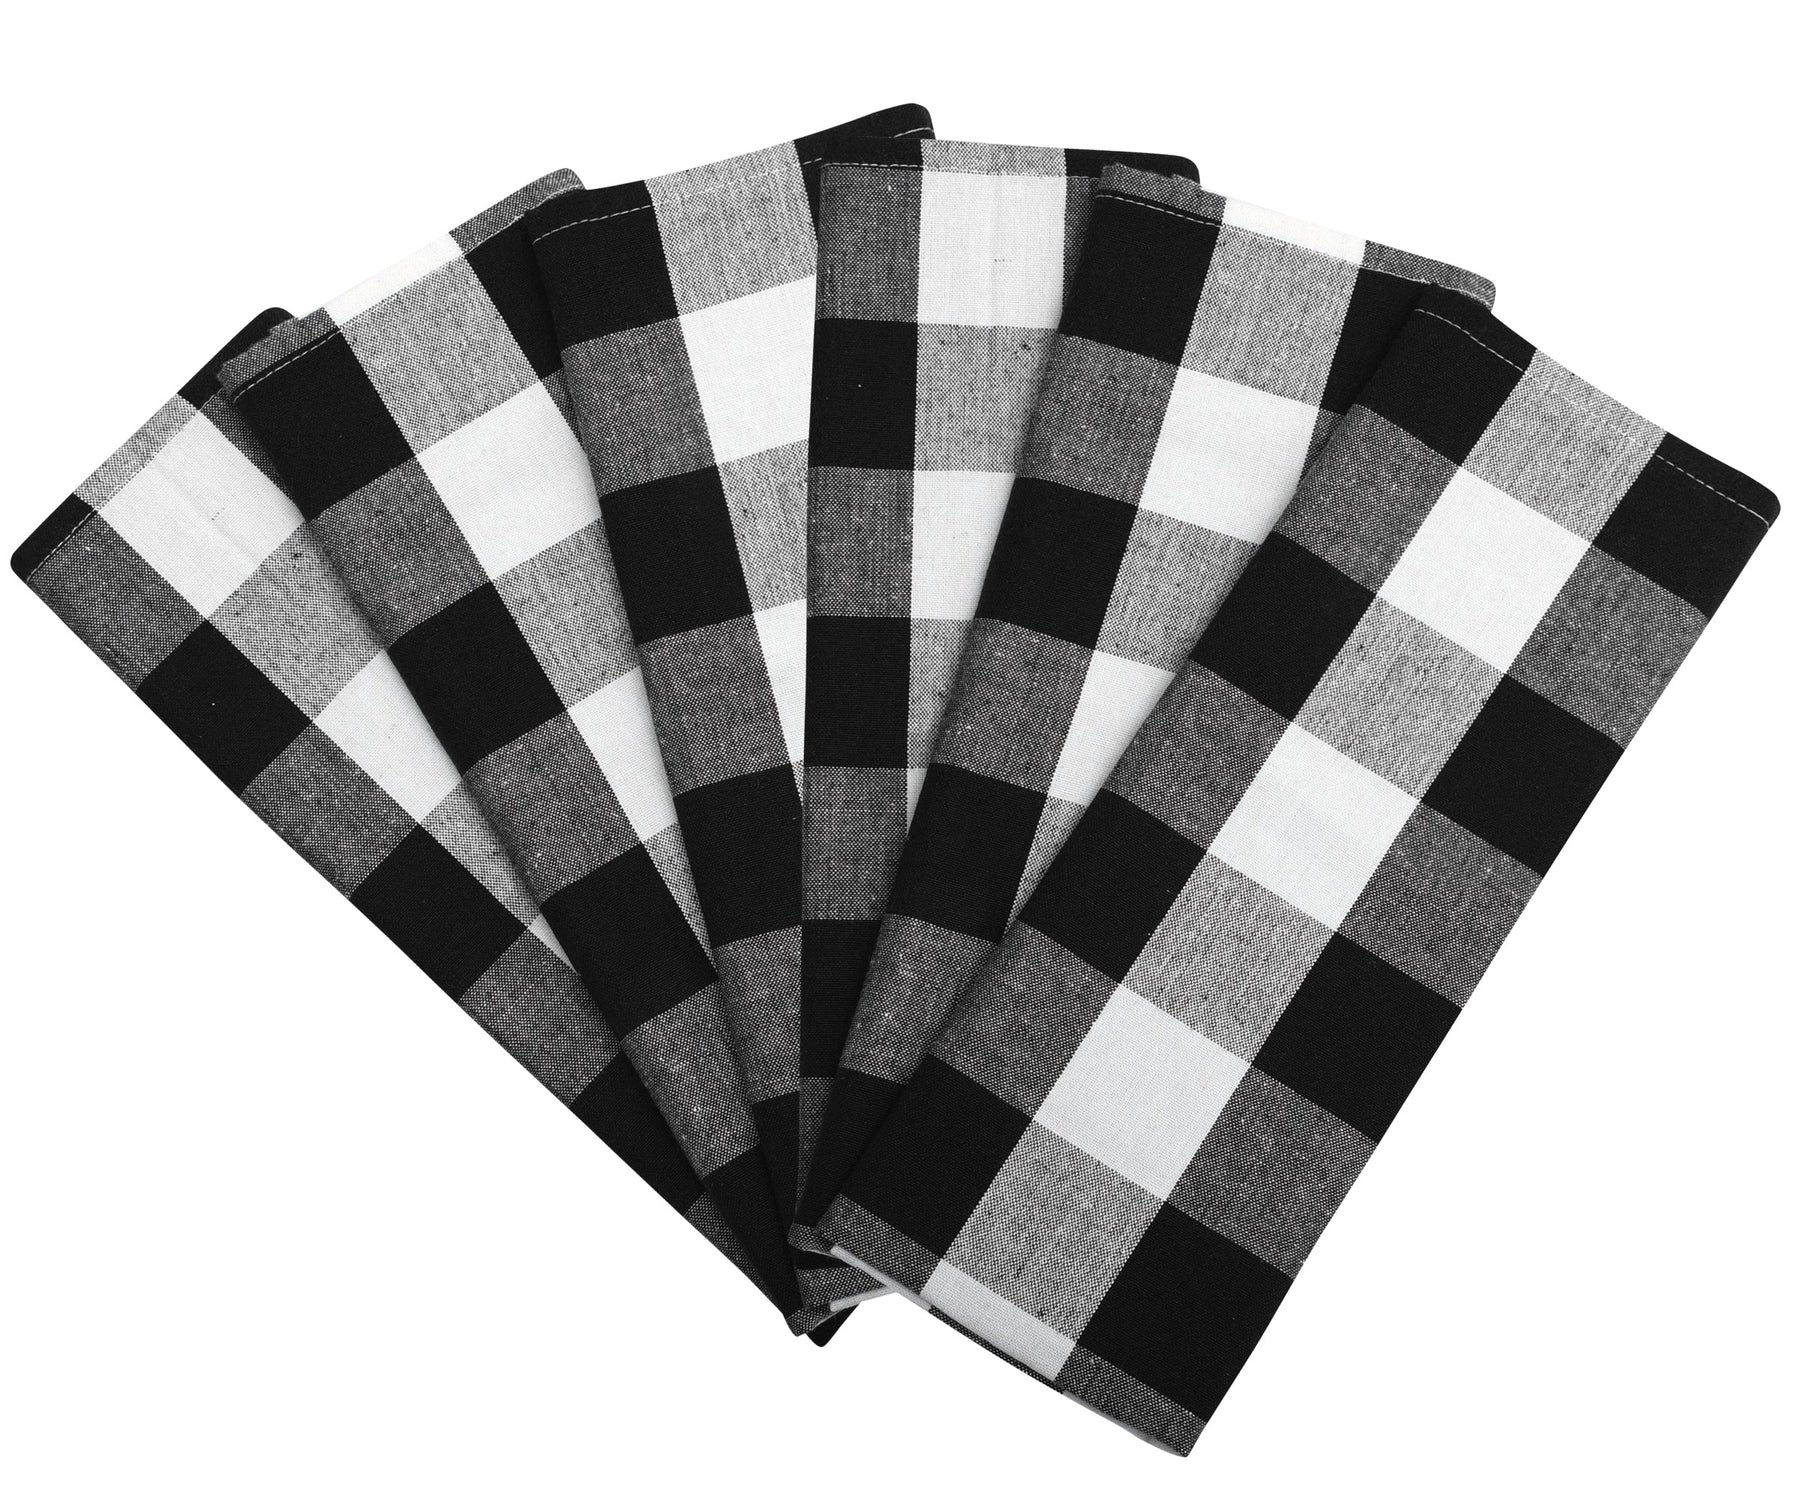 Four folded black and white buffalo check cotton kitchen towels